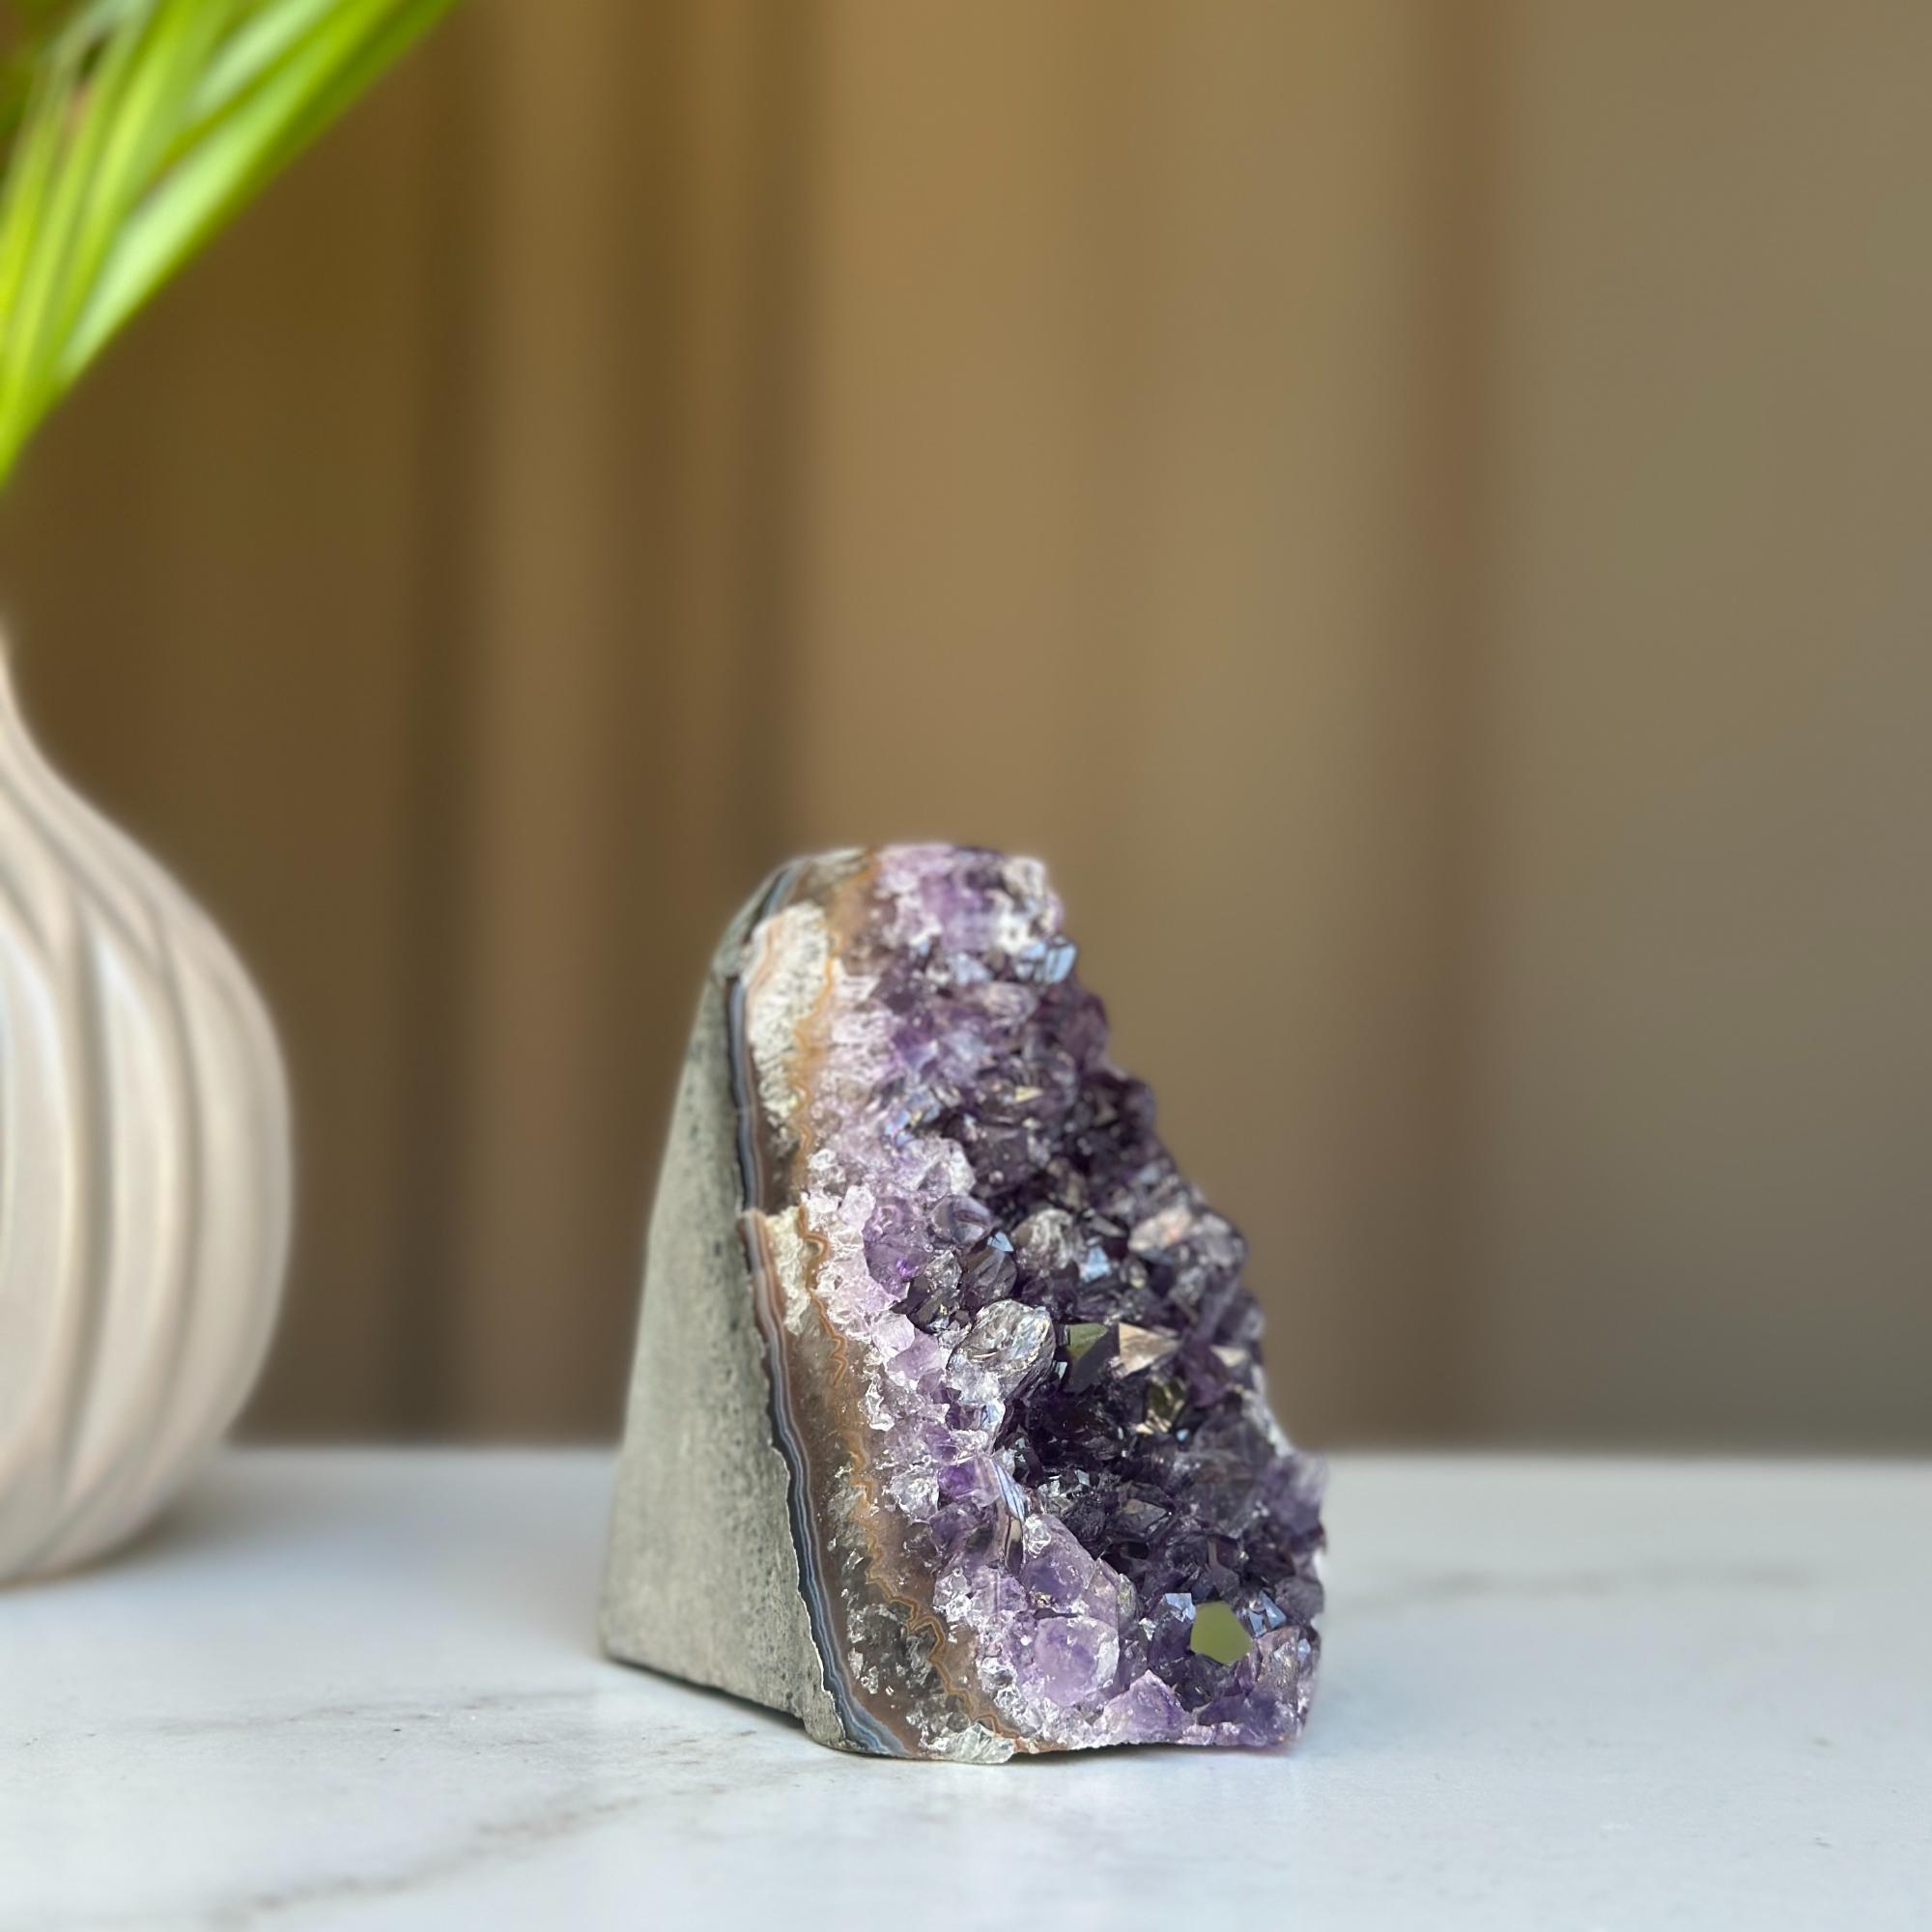 Deep Purple Project Amethyst Crystal ON SALE, galaxy amethyst geode for home decoration